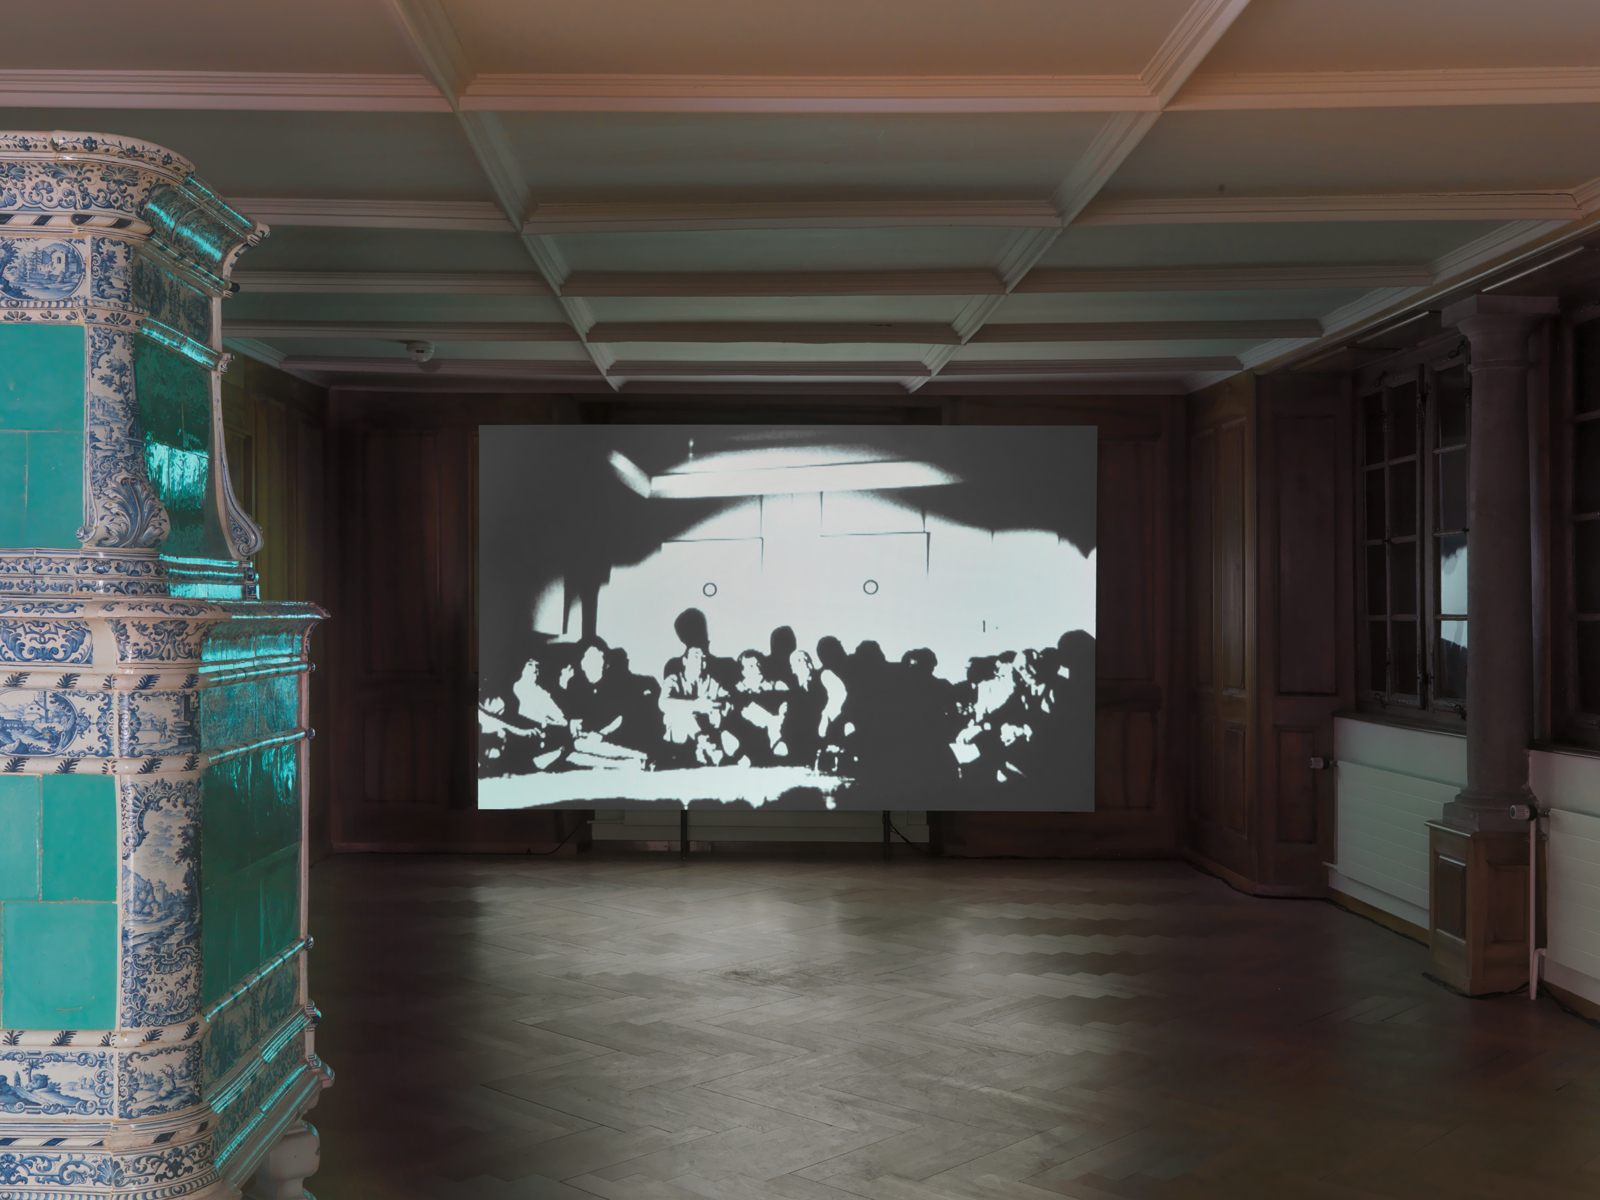 Olivier Mosset / "Leaving the Museum", exhibition view, Kunsthalle Zürich / 2012